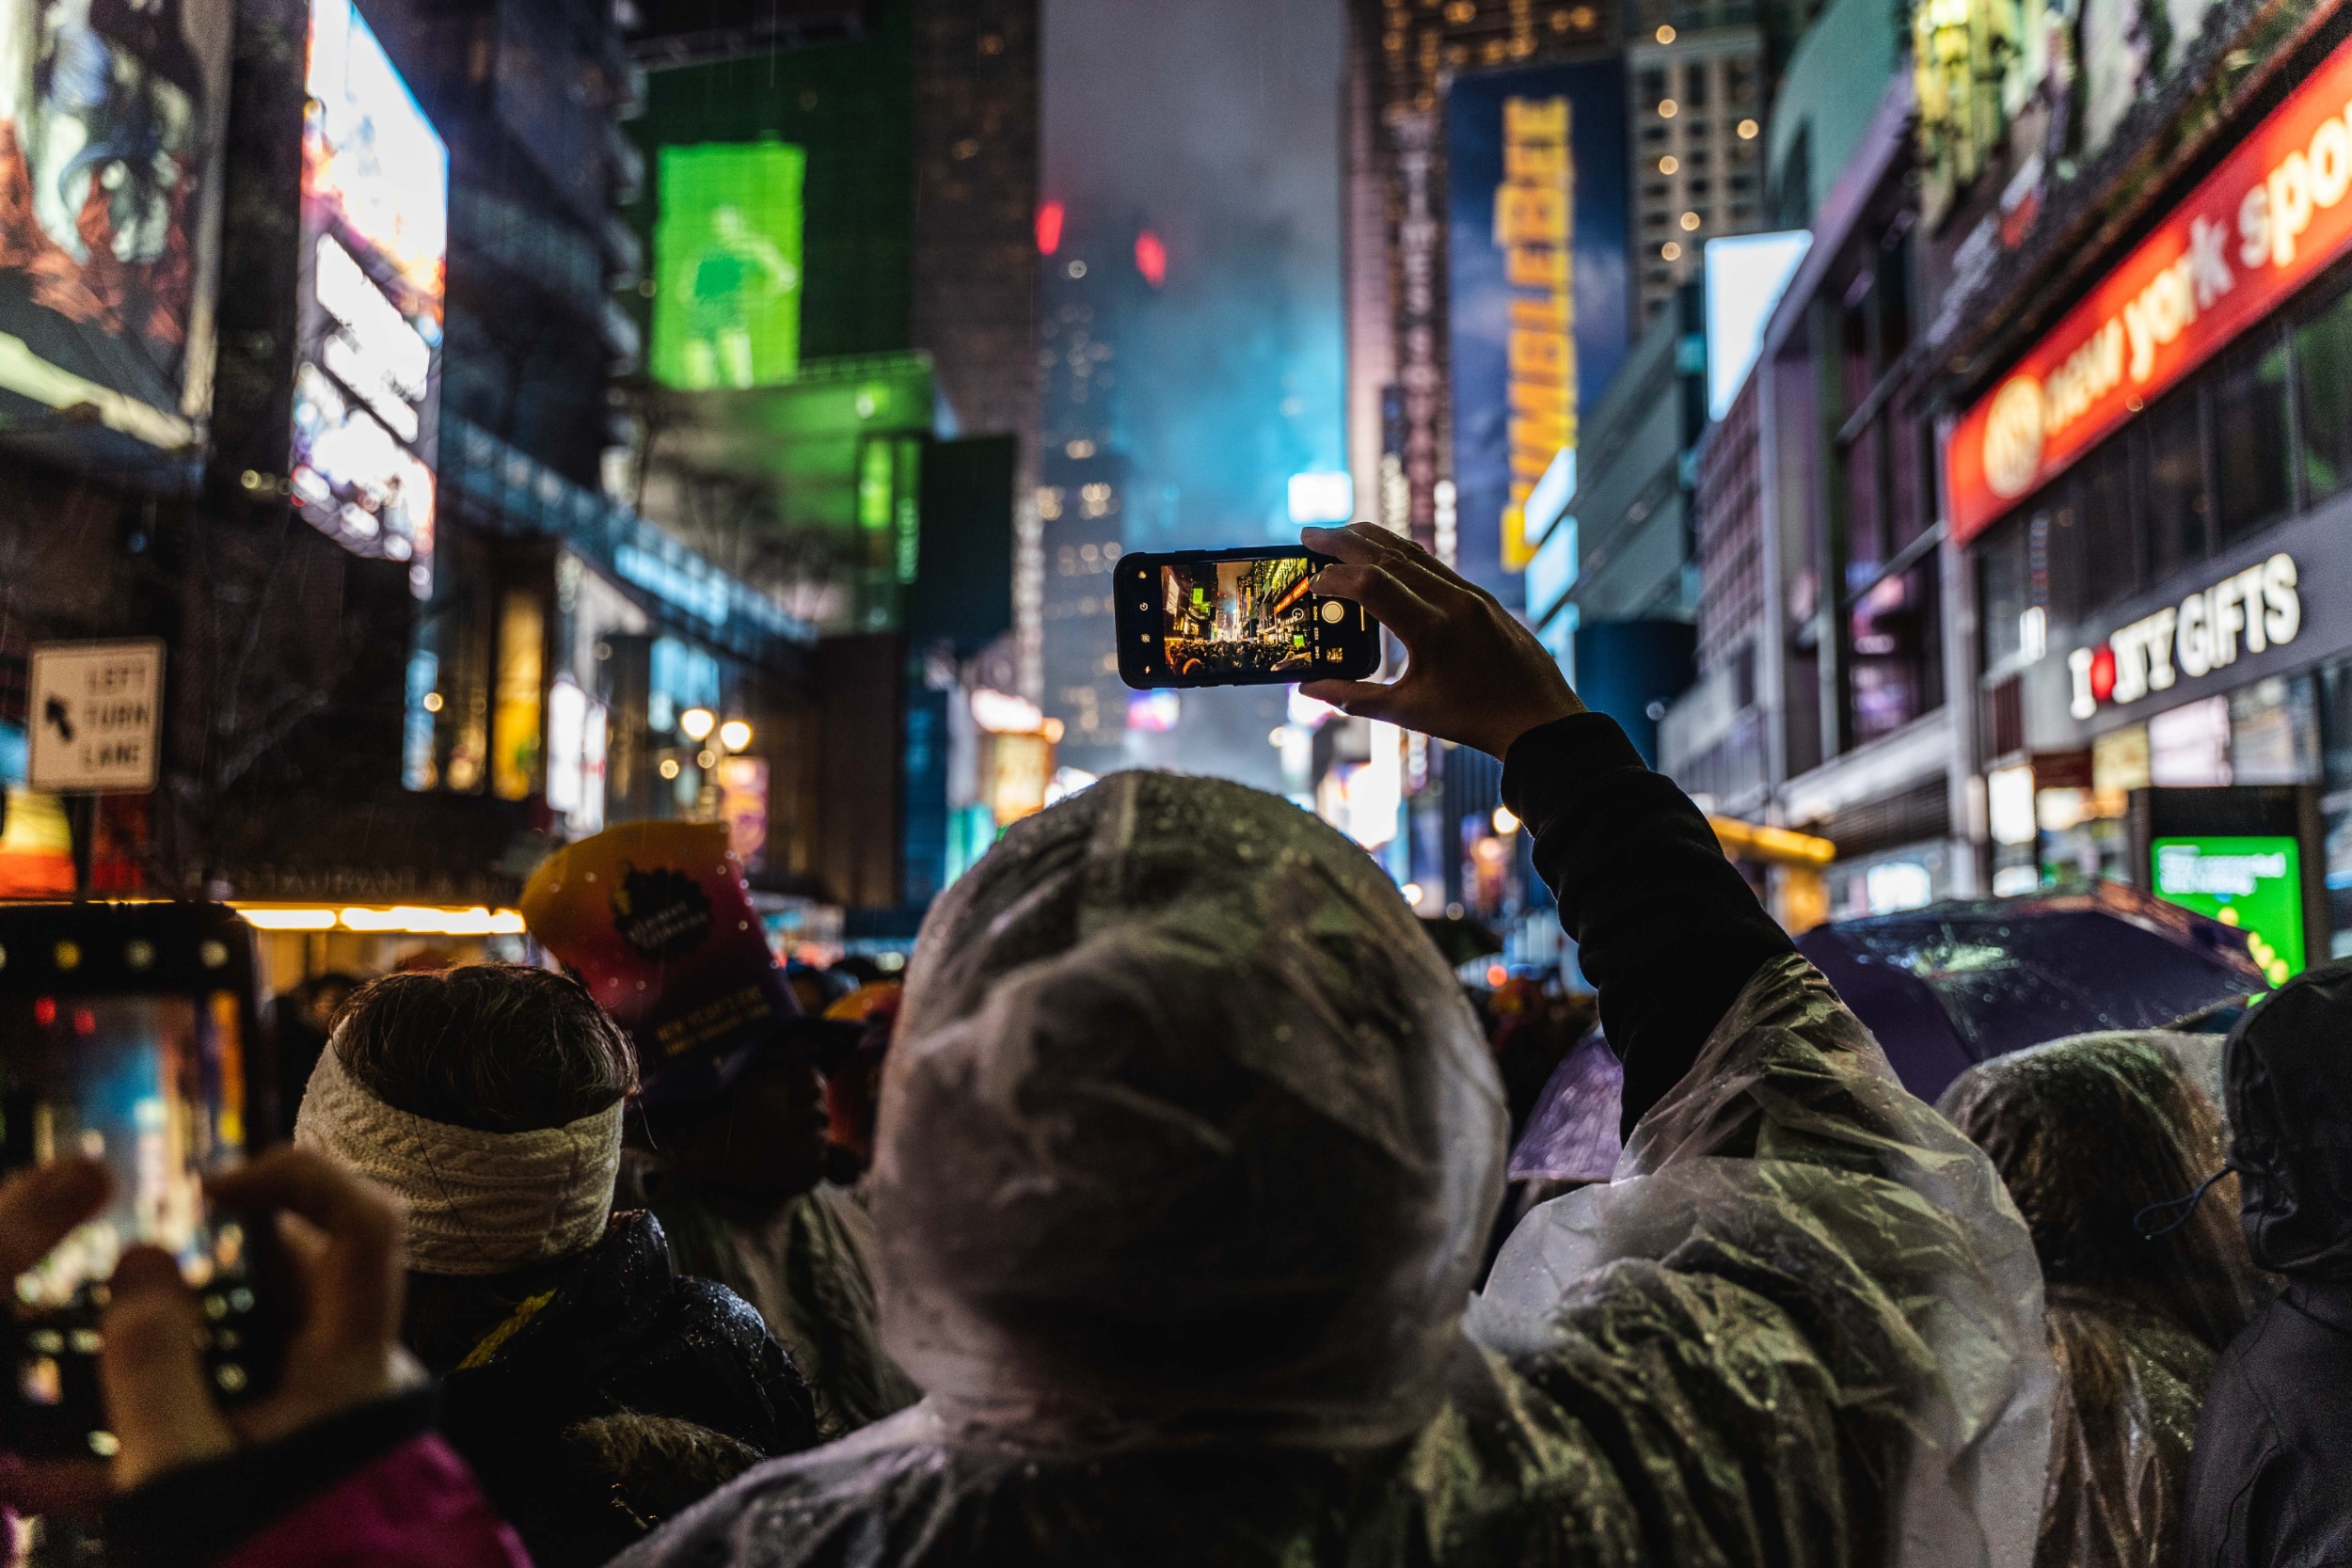 Crowds gather to watch the ball drop in Times Square on New Year's Eve